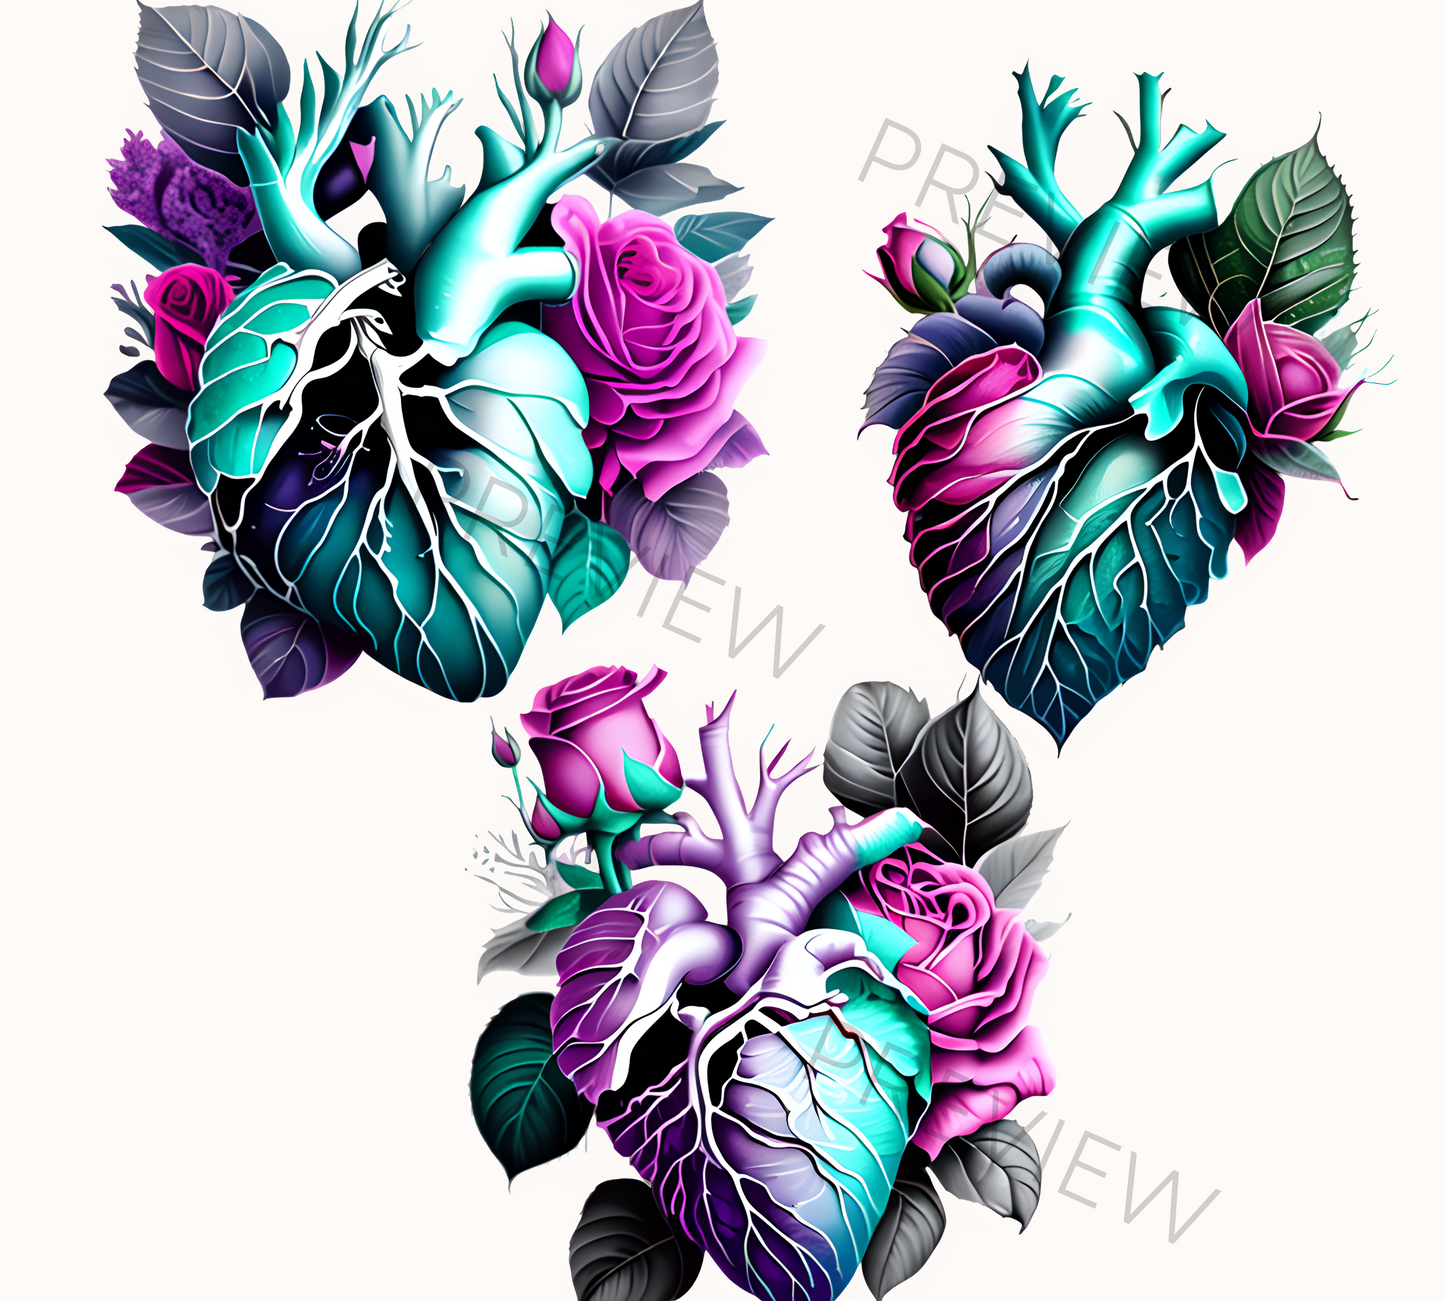 Human Heart | Anatomy Clipart | Heart Clipart | Teal & Tan Floral Heart Graphics | Anatomic Heart | Clip Art | Medical Png| Commercial Use